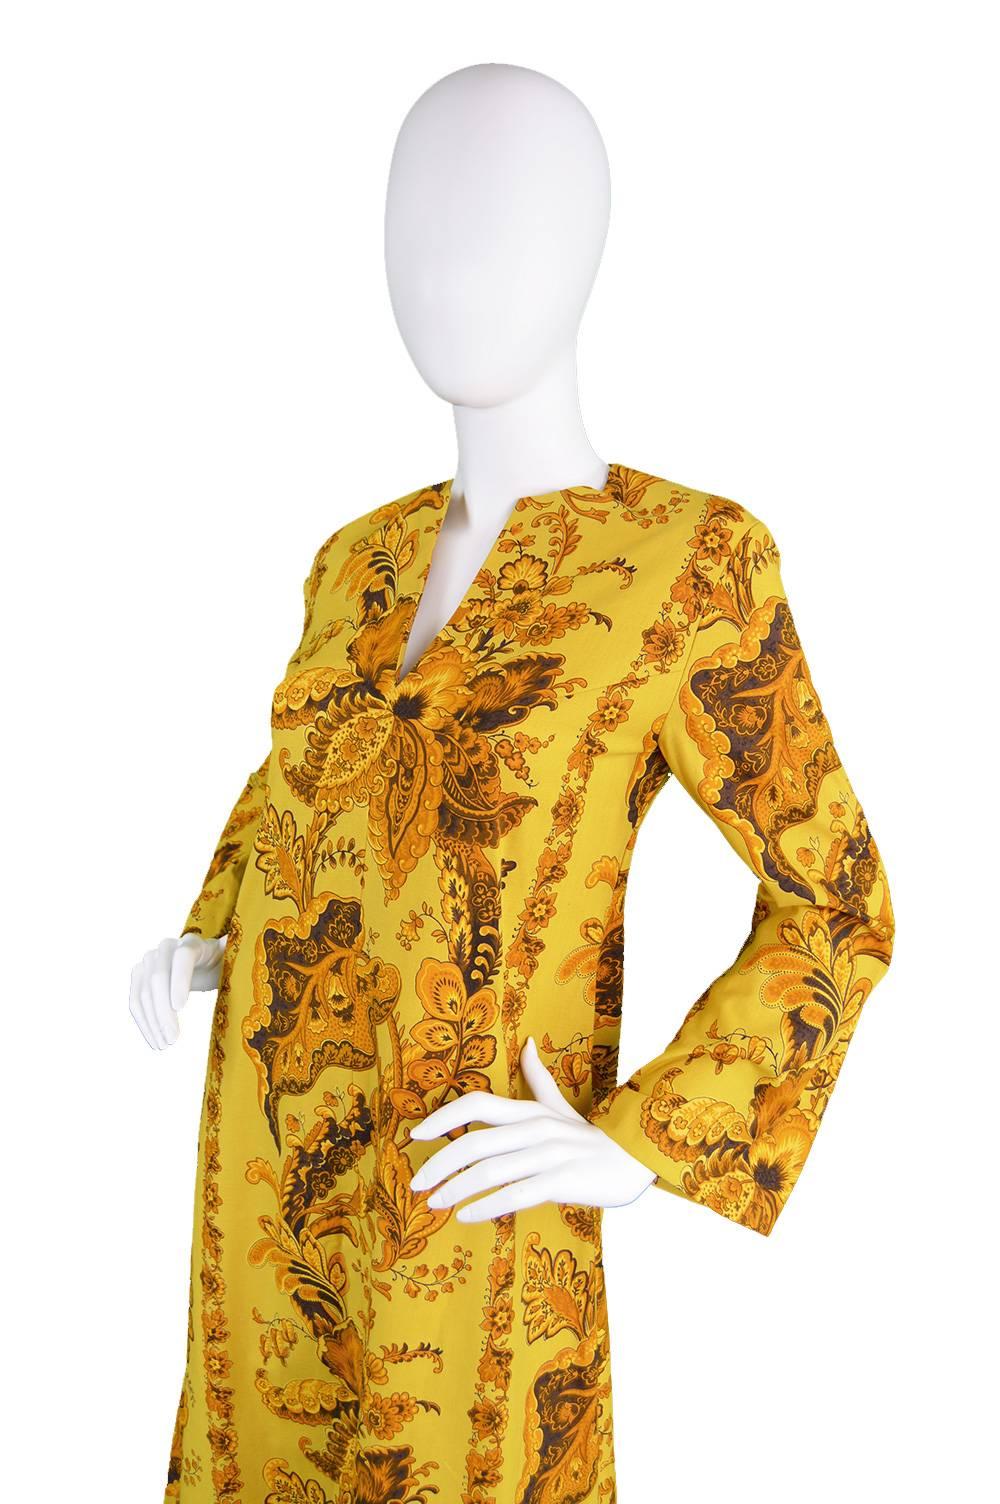 An absolutely stunning vintage women's caftan dress from the late 60s by genius and iconic British vintage fashion designer, Janice Wainwright, for Simon Massey - before she started her own label in the early 70s. Made with an incredible, vibrantly